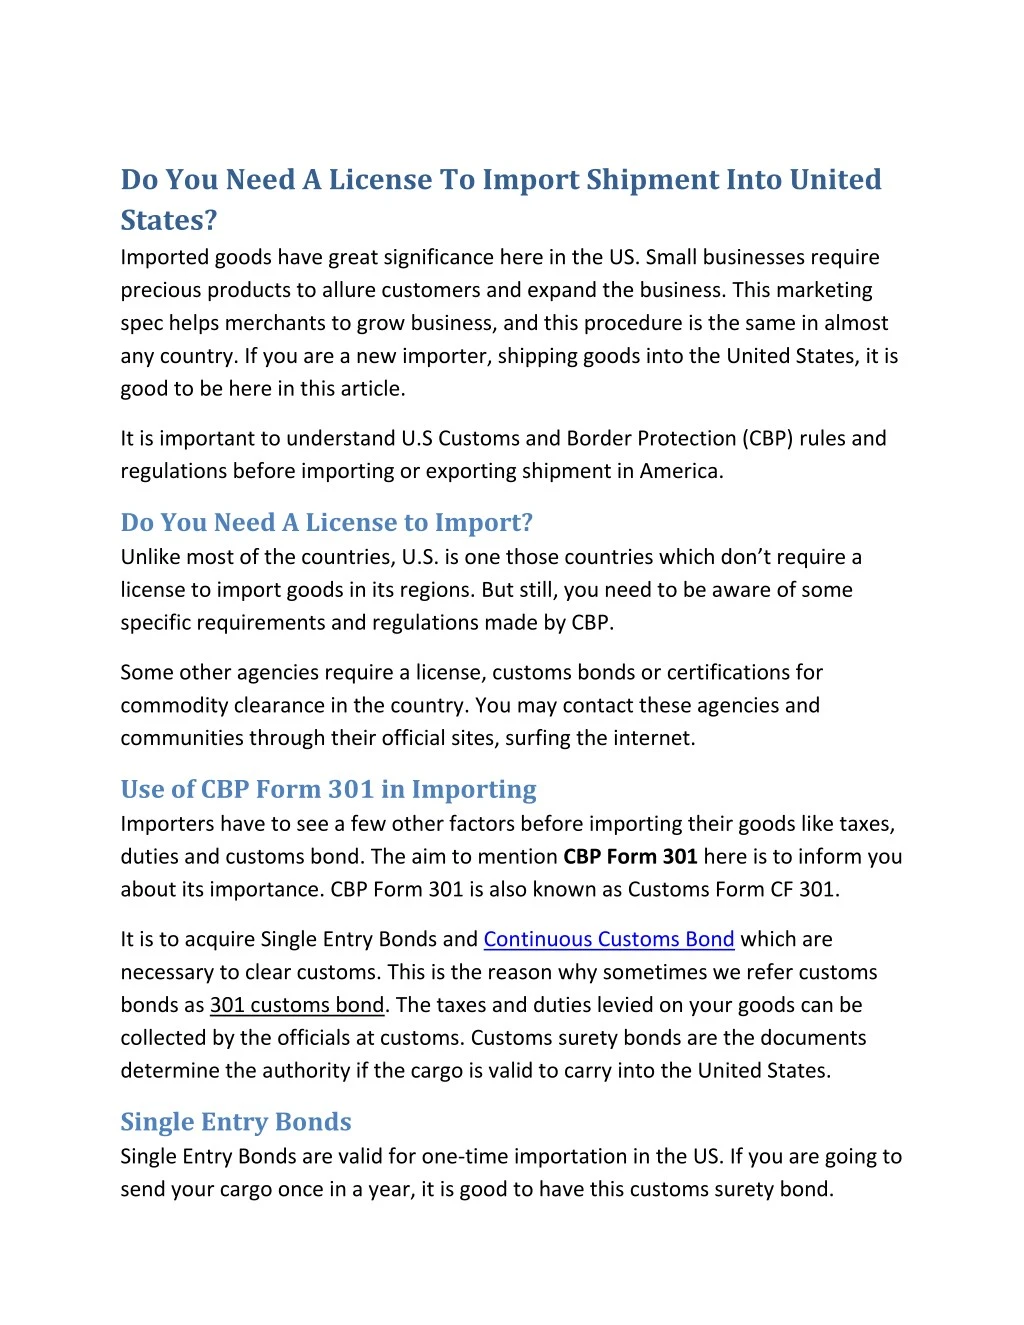 do you need a license to import shipment into